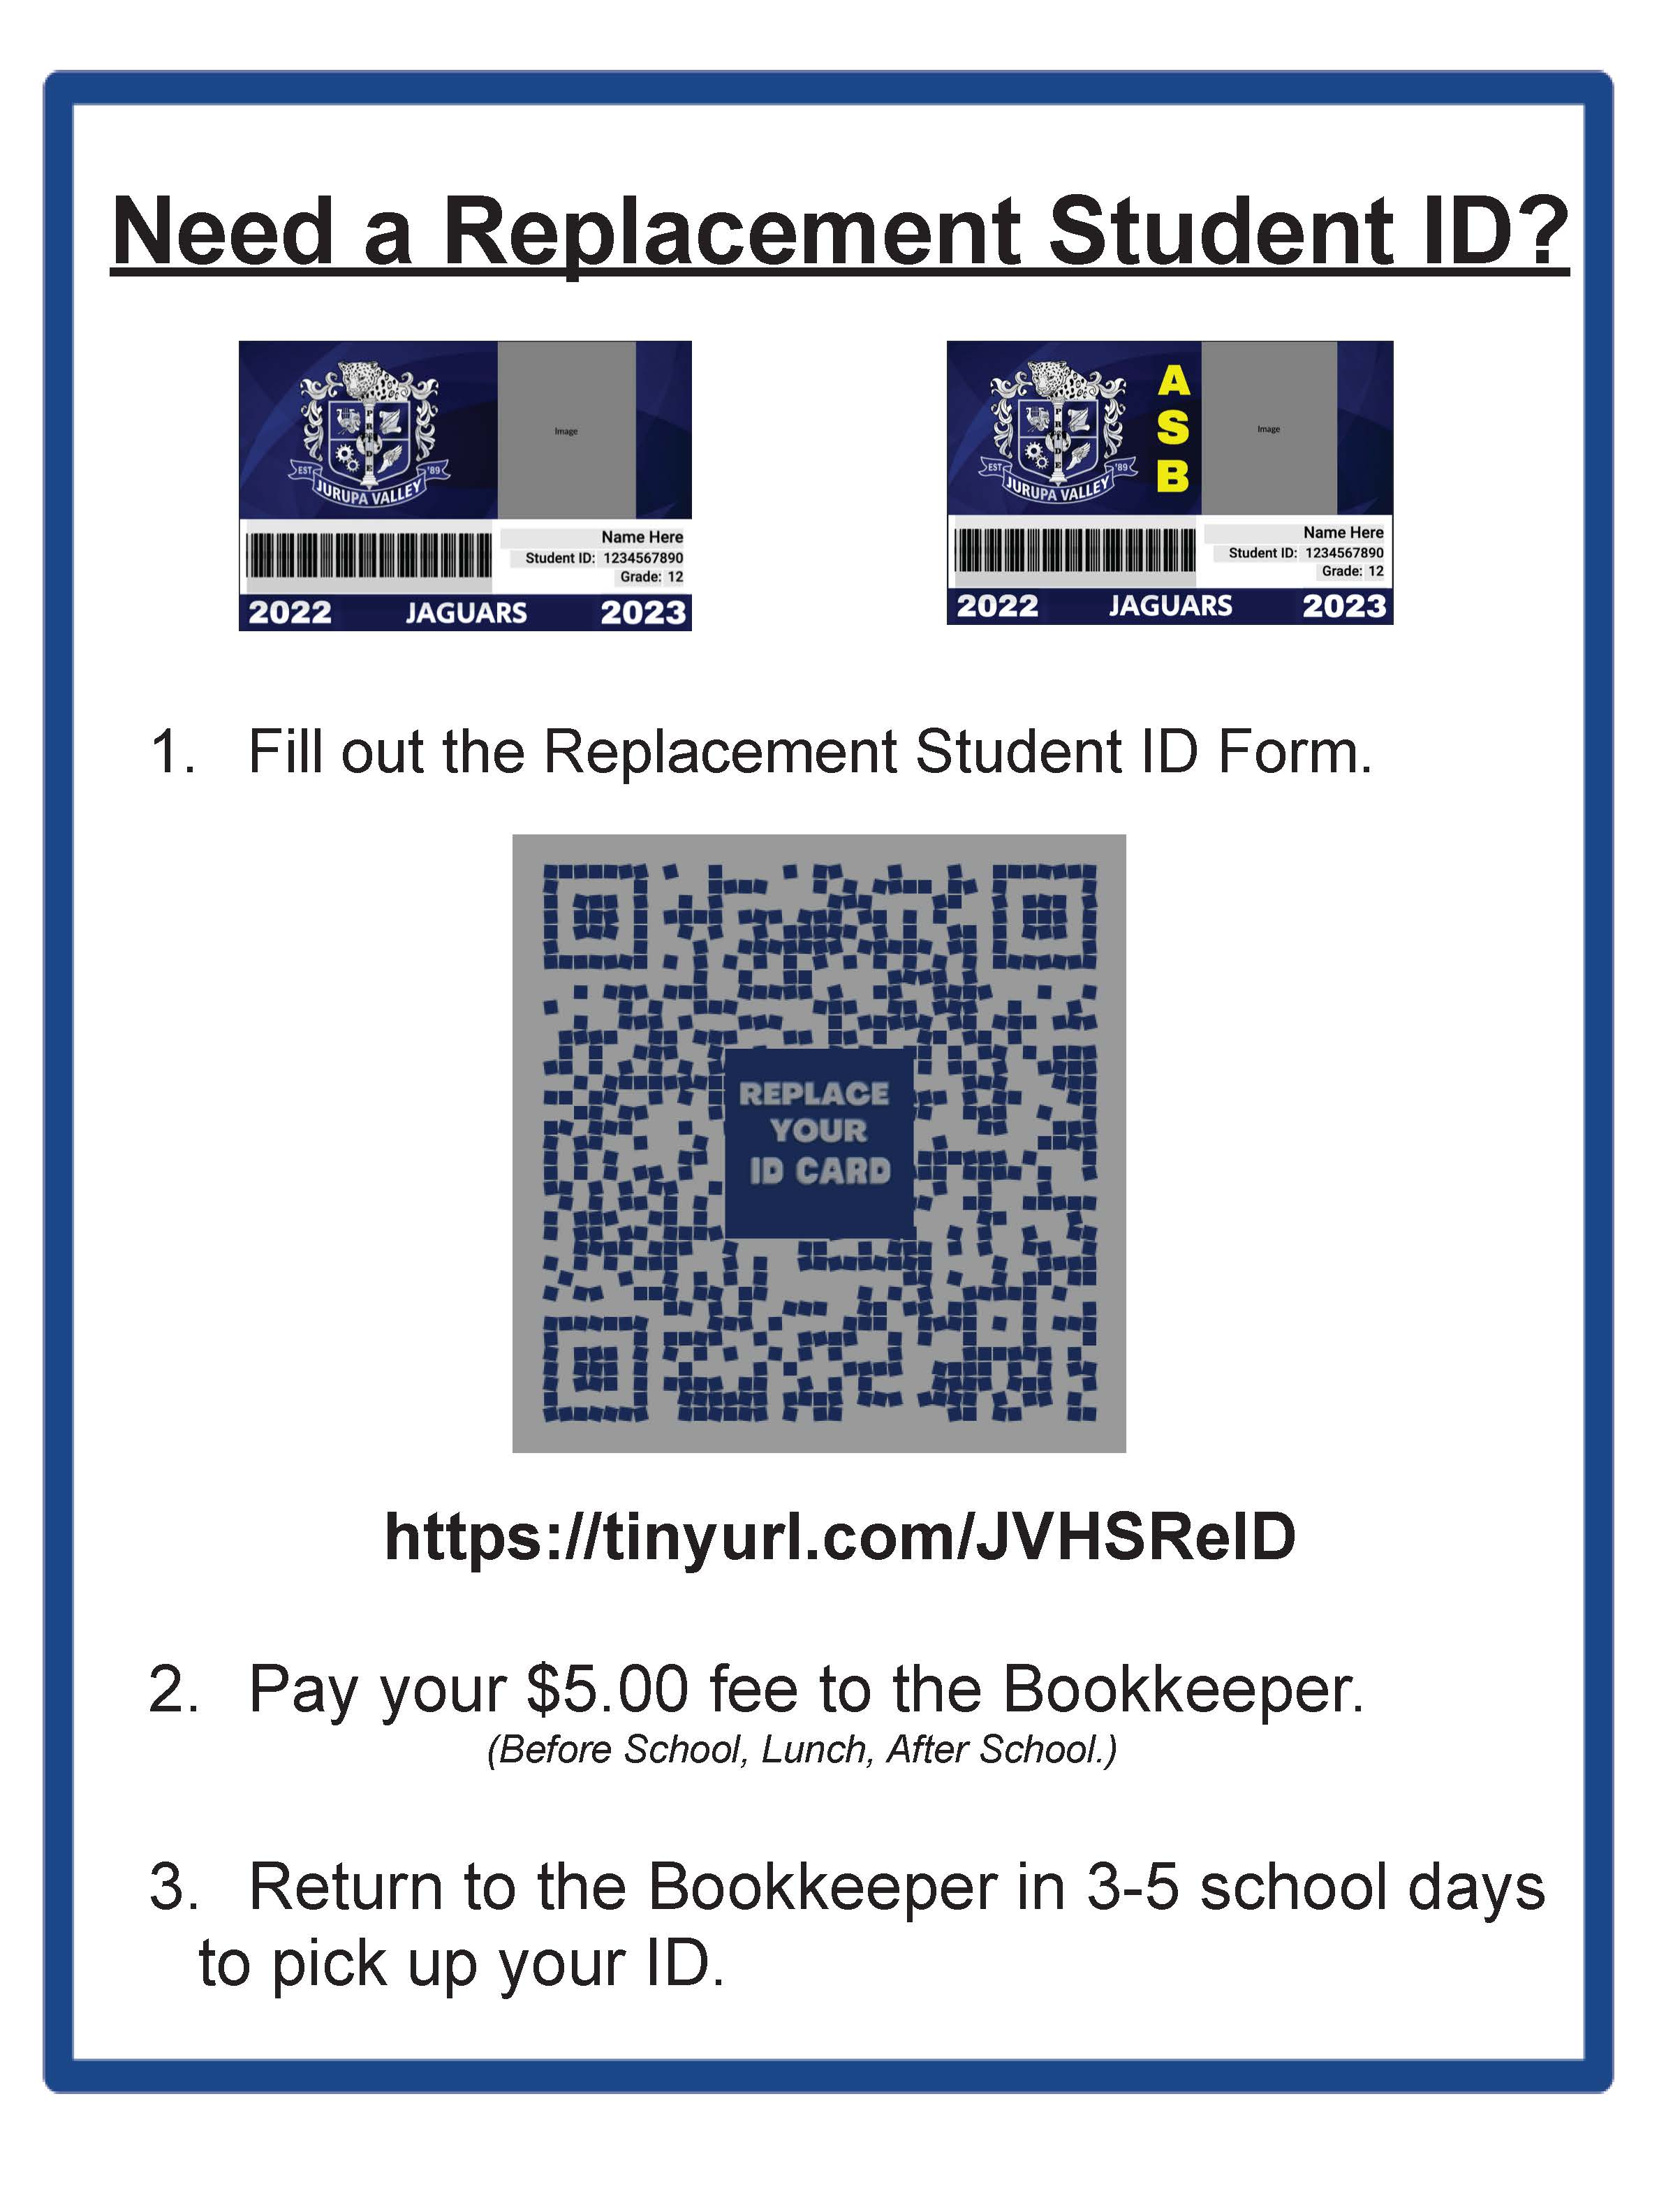 ID Replacement Flyer.jpg